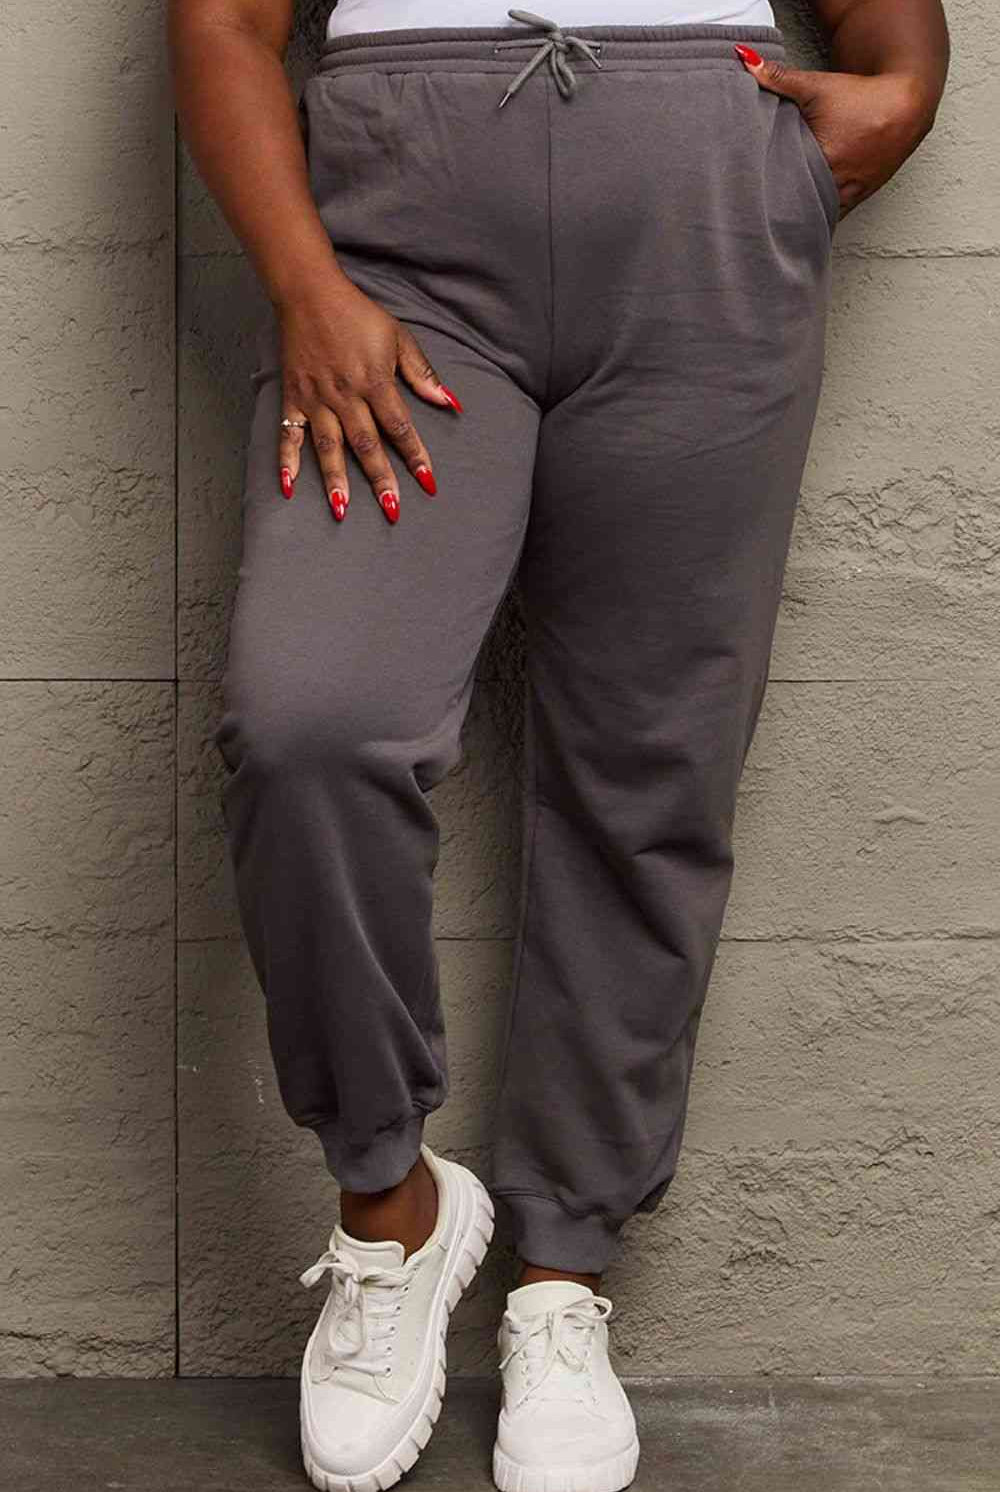 Simply Love Full Size Drawstring Sweatpants - GemThreads Boutique